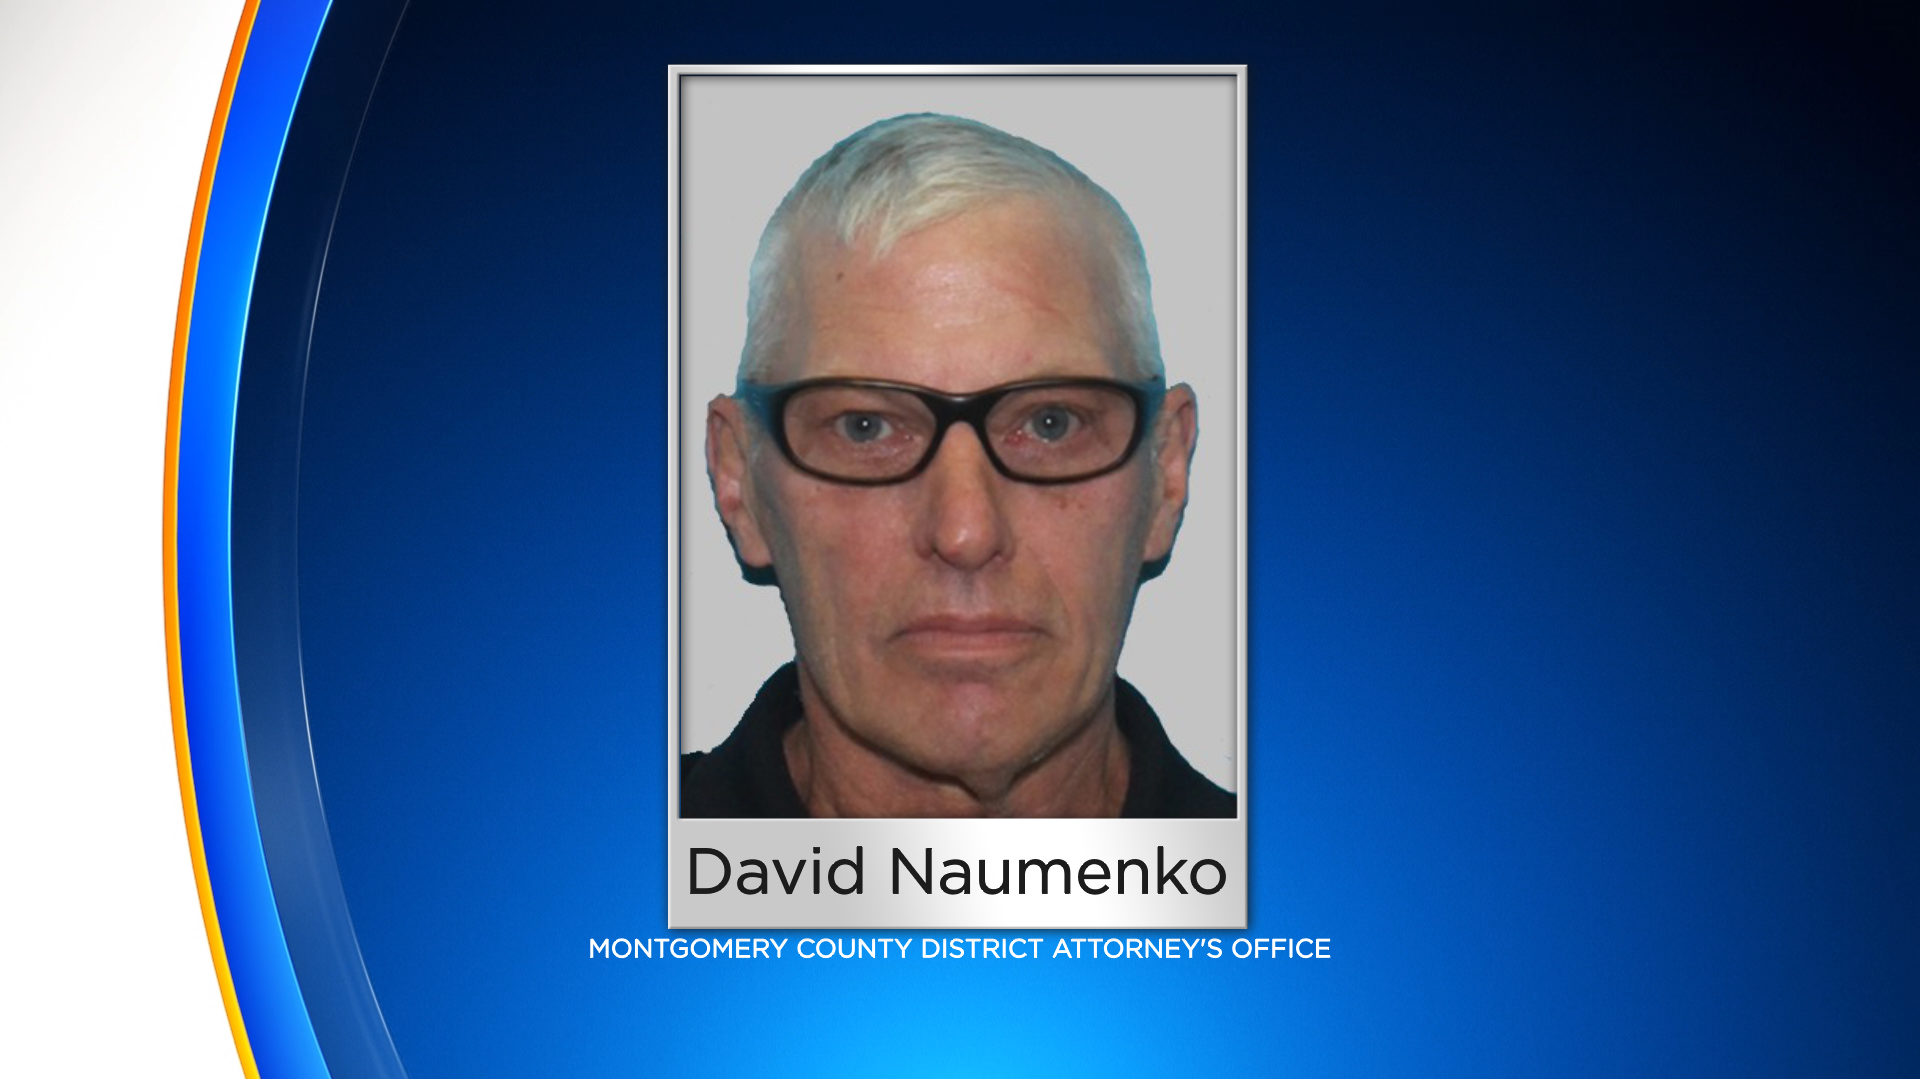 David Naumenko Faces Multiple Felony Charges After Allegedly Firing Shots At Police In Upper Providence Township